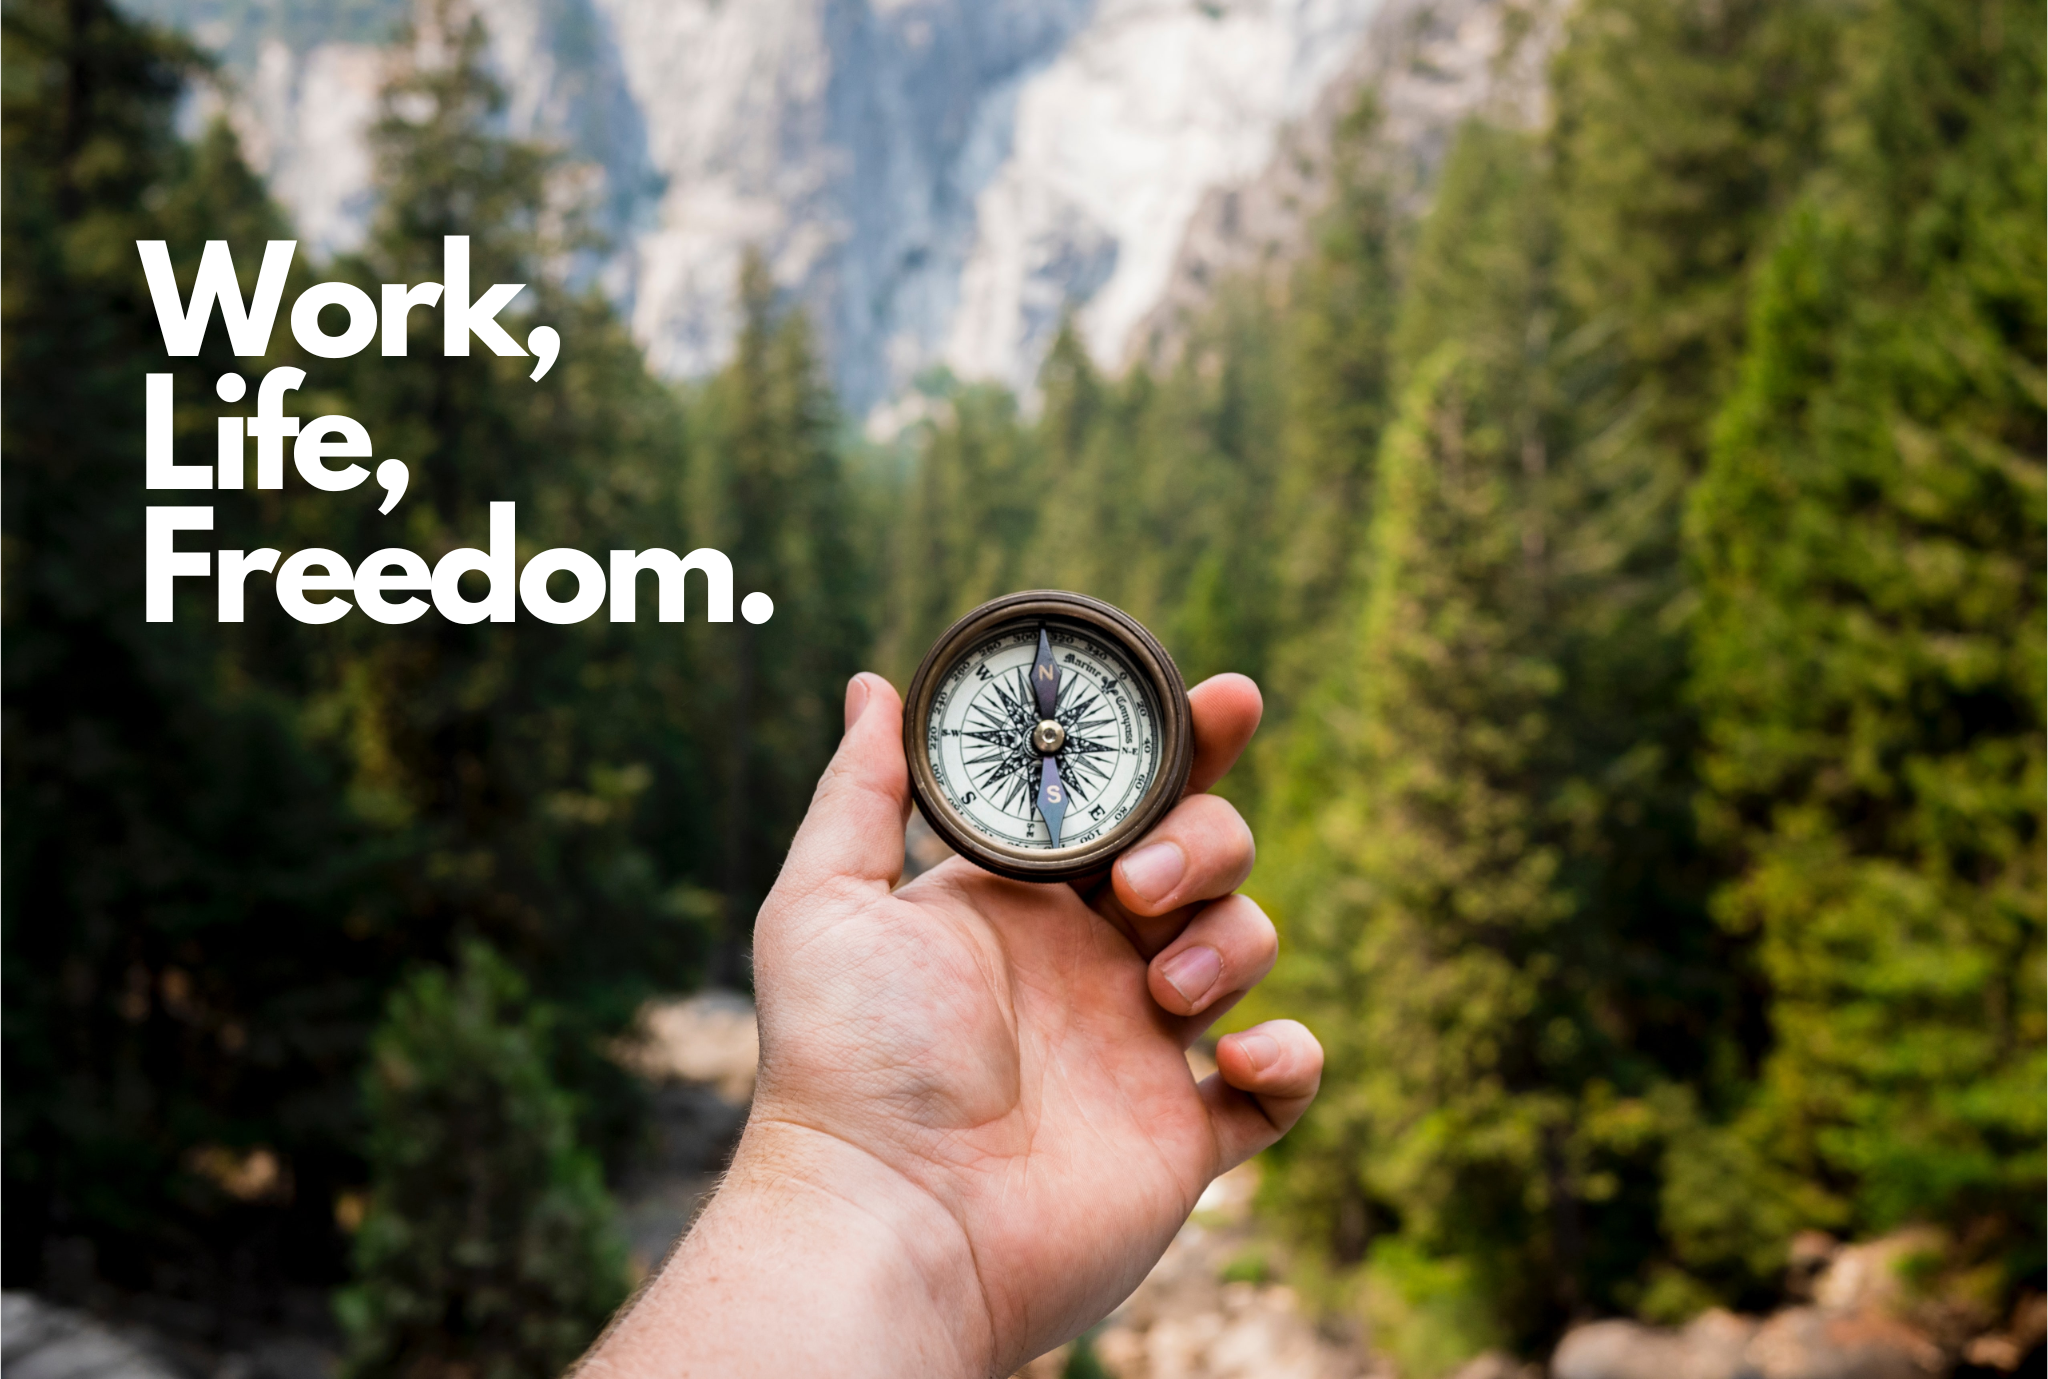 A Hand Holding a Compass in the Woods With the Words "Work, Life, Freedom."